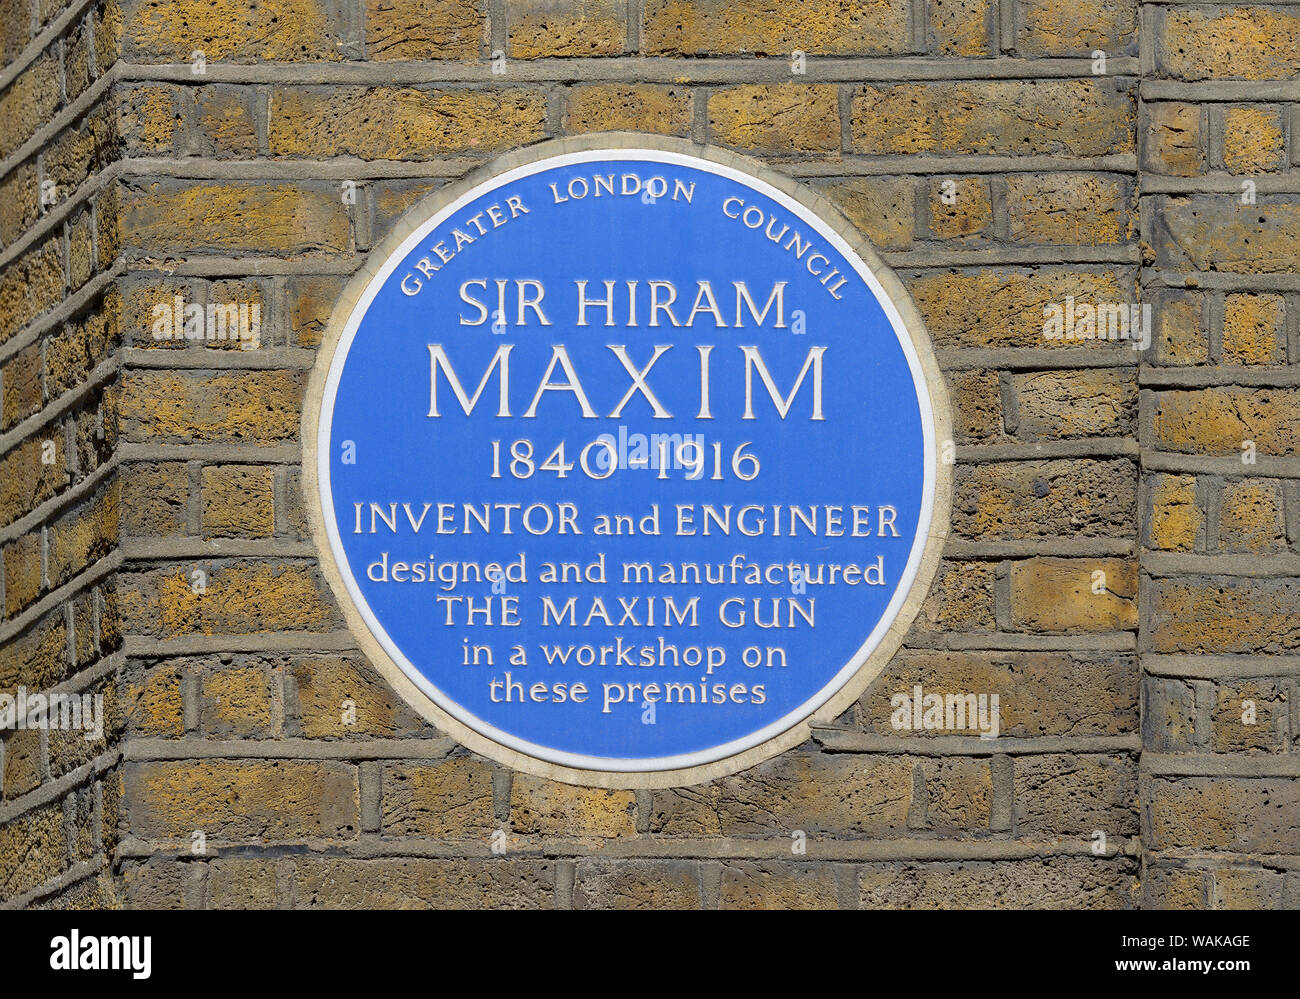 London, England, UK. Commemorative Blue Plaque: SIR HIRAM MAXIM 1840-1916 INVENTOR and ENGINEER designed and manufactured THE MAXIM GUN in a workshop Stock Photo